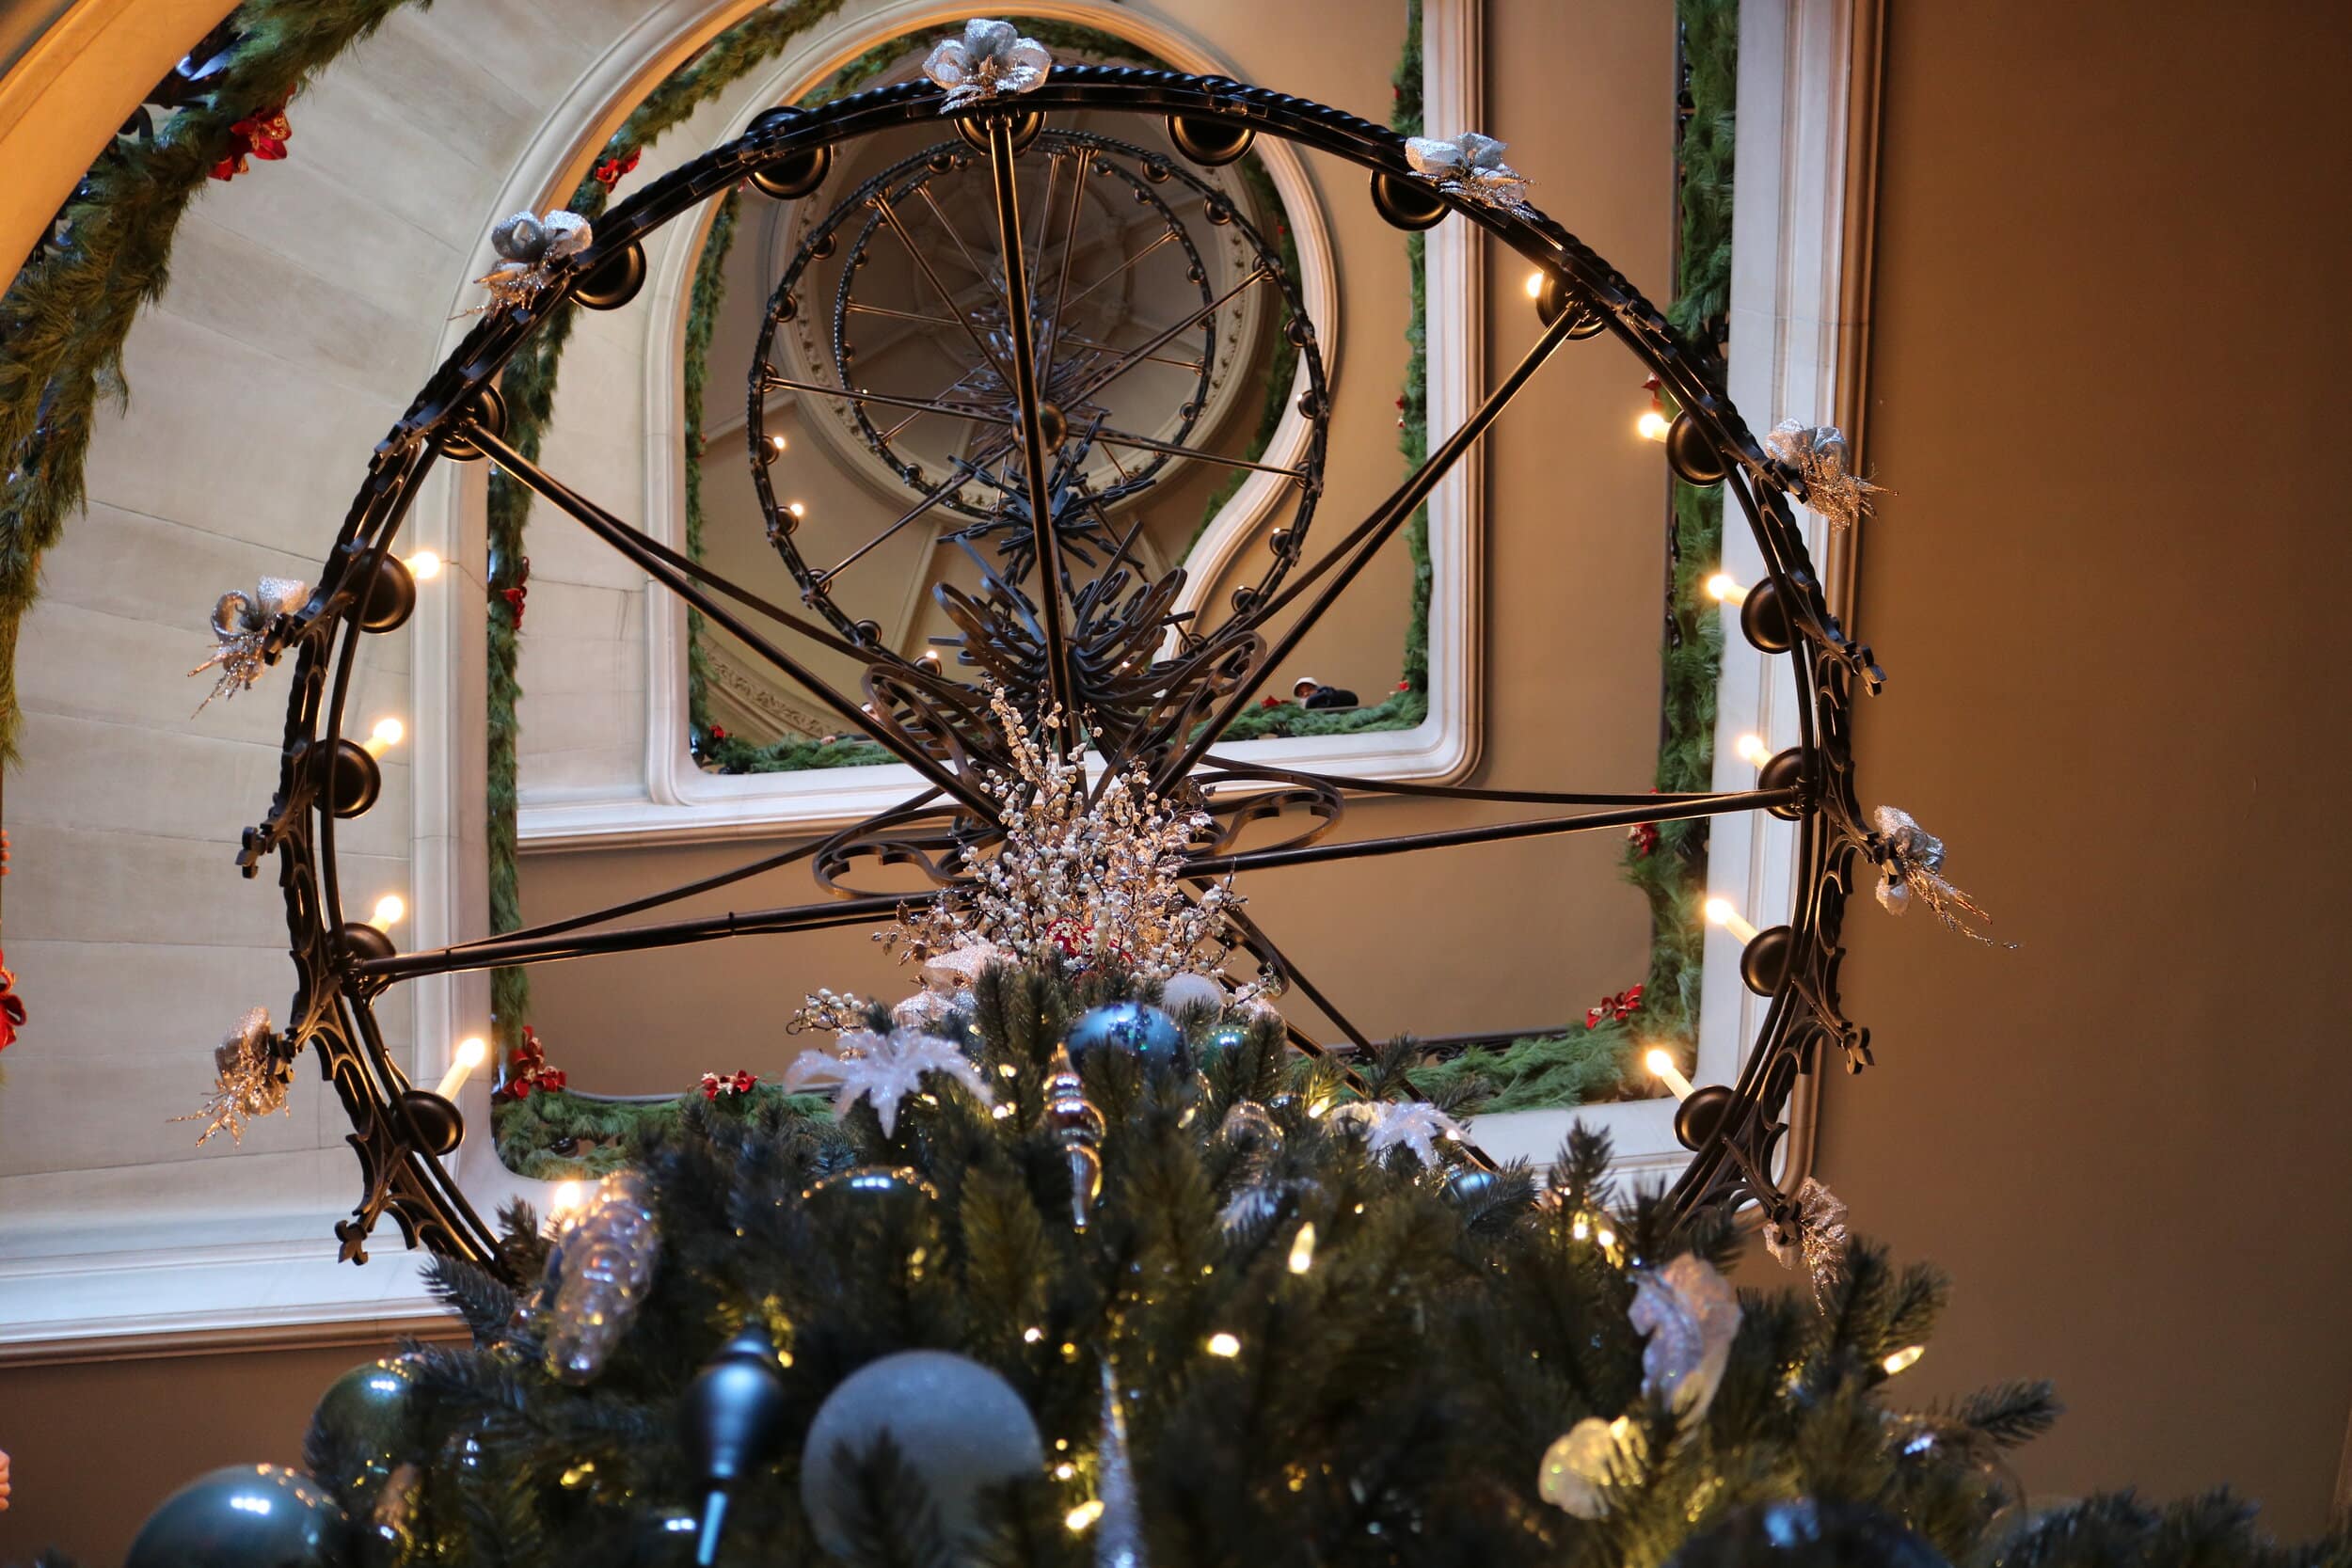 A view up the main stair case and chandelier, from the bottom of the Christmas tree on the main floor.